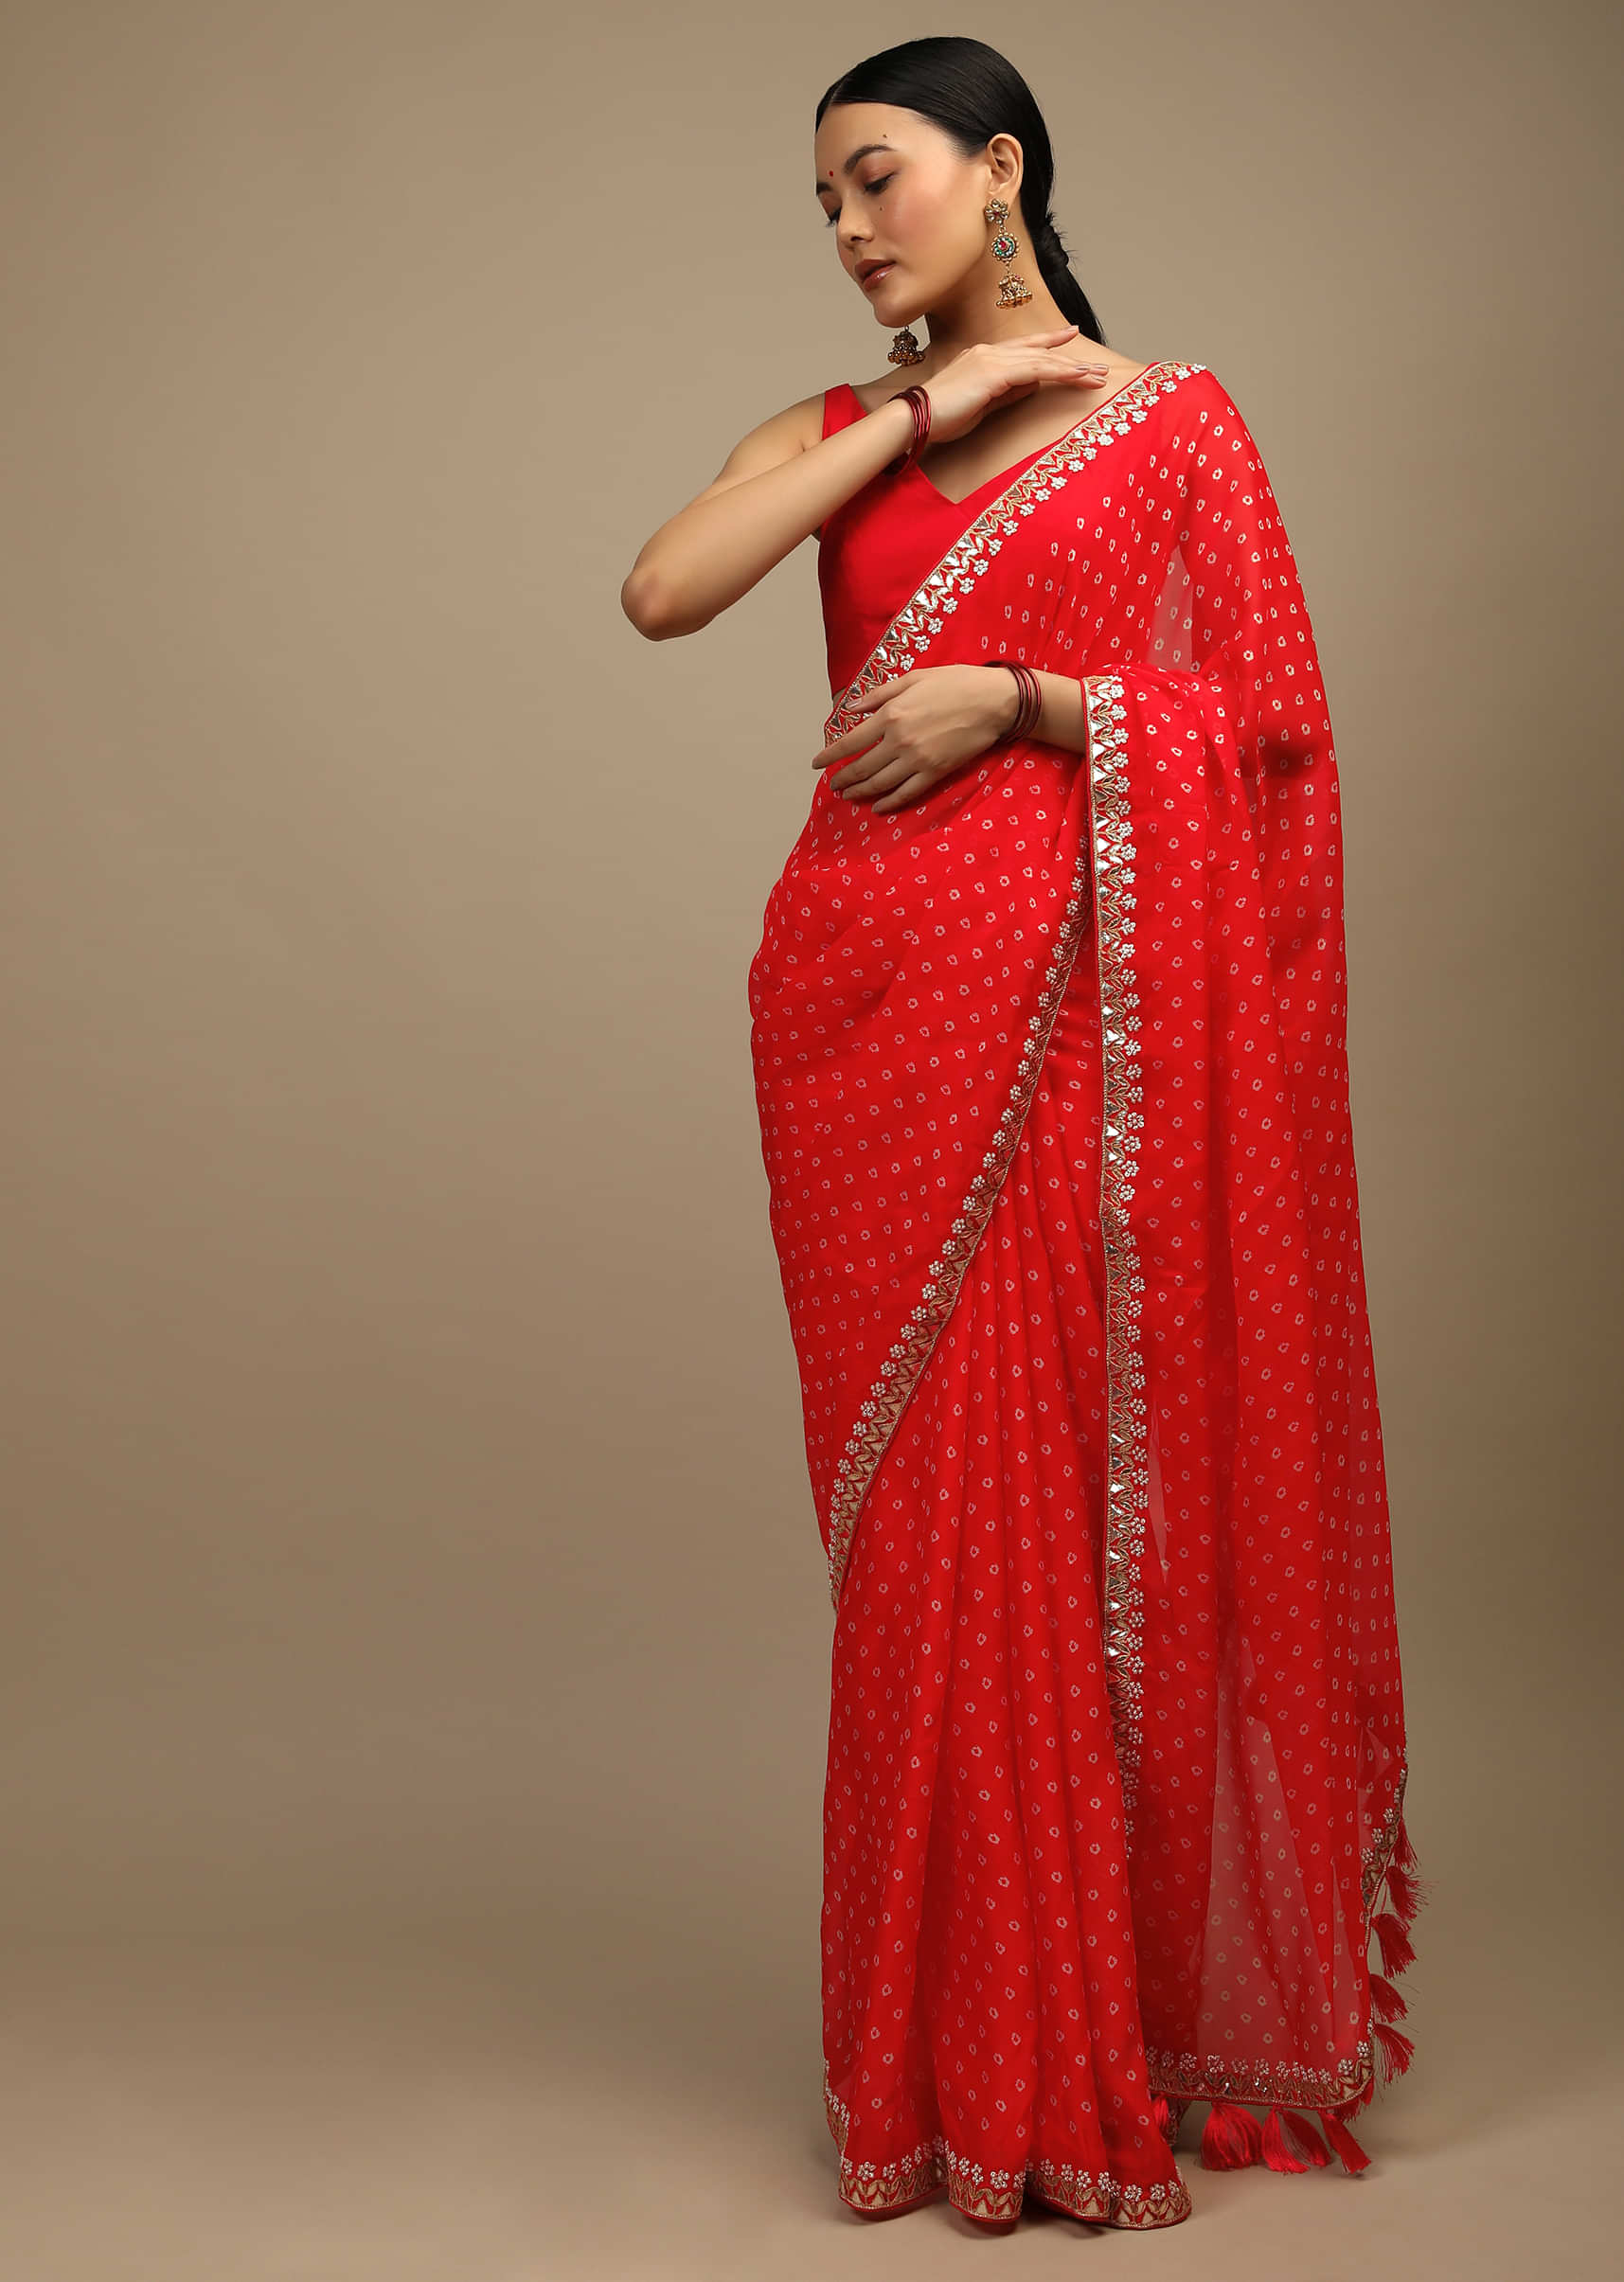 Coral Red Saree In Organza With Bandhani Buttis And Gotta Patti Embroidered Floral Motifs On The Border  